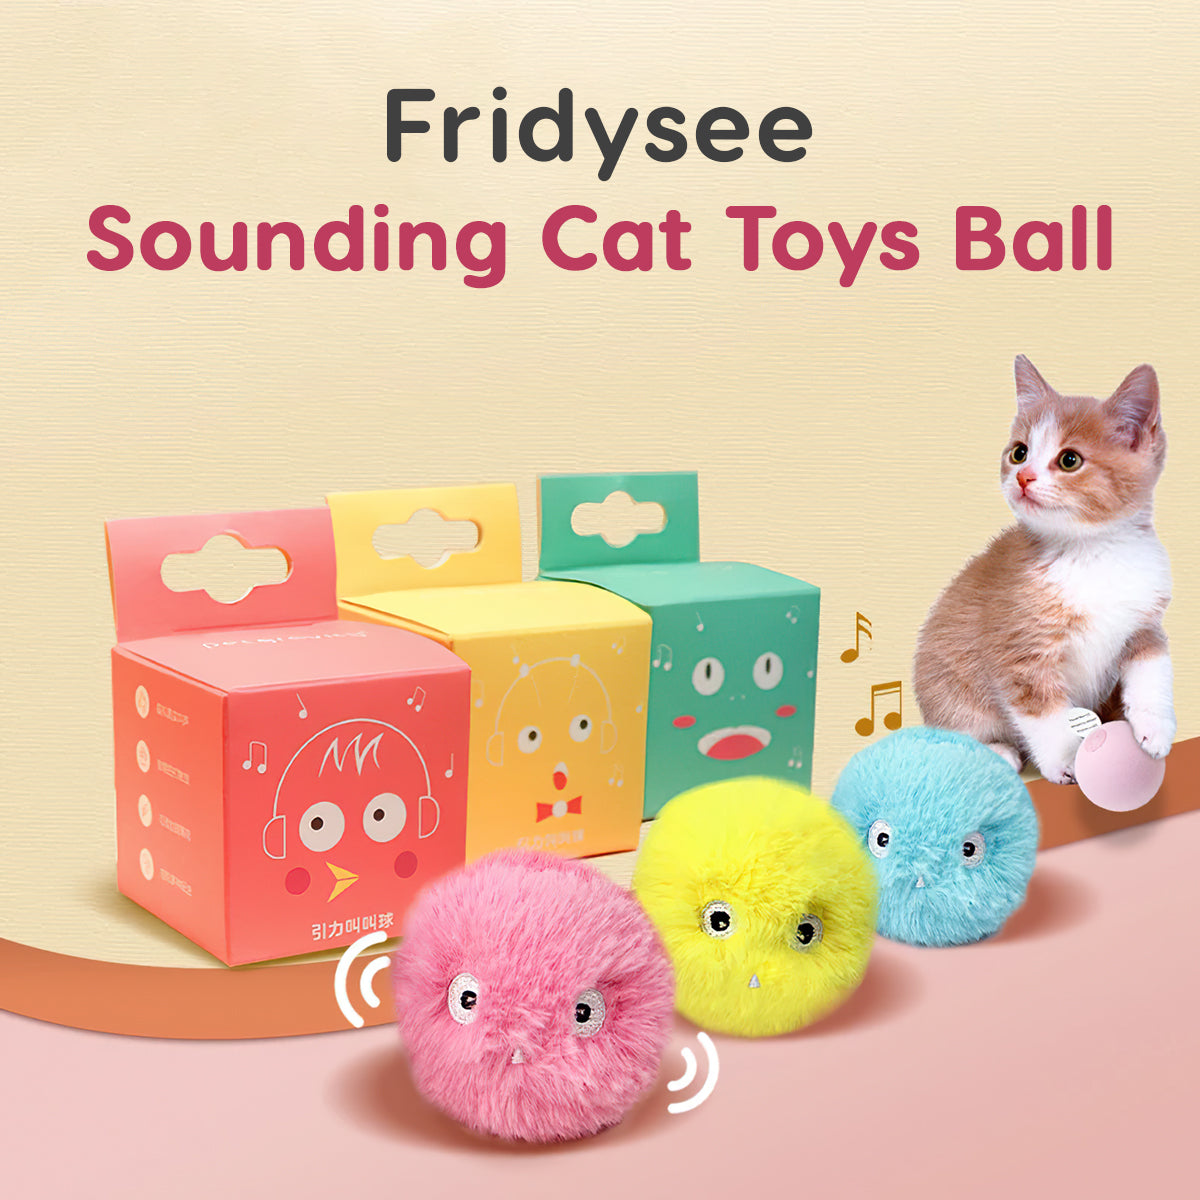 Fridysee Sounding Cat Toys Ball - Smart Interactive Ball Toy For Pet 🐾